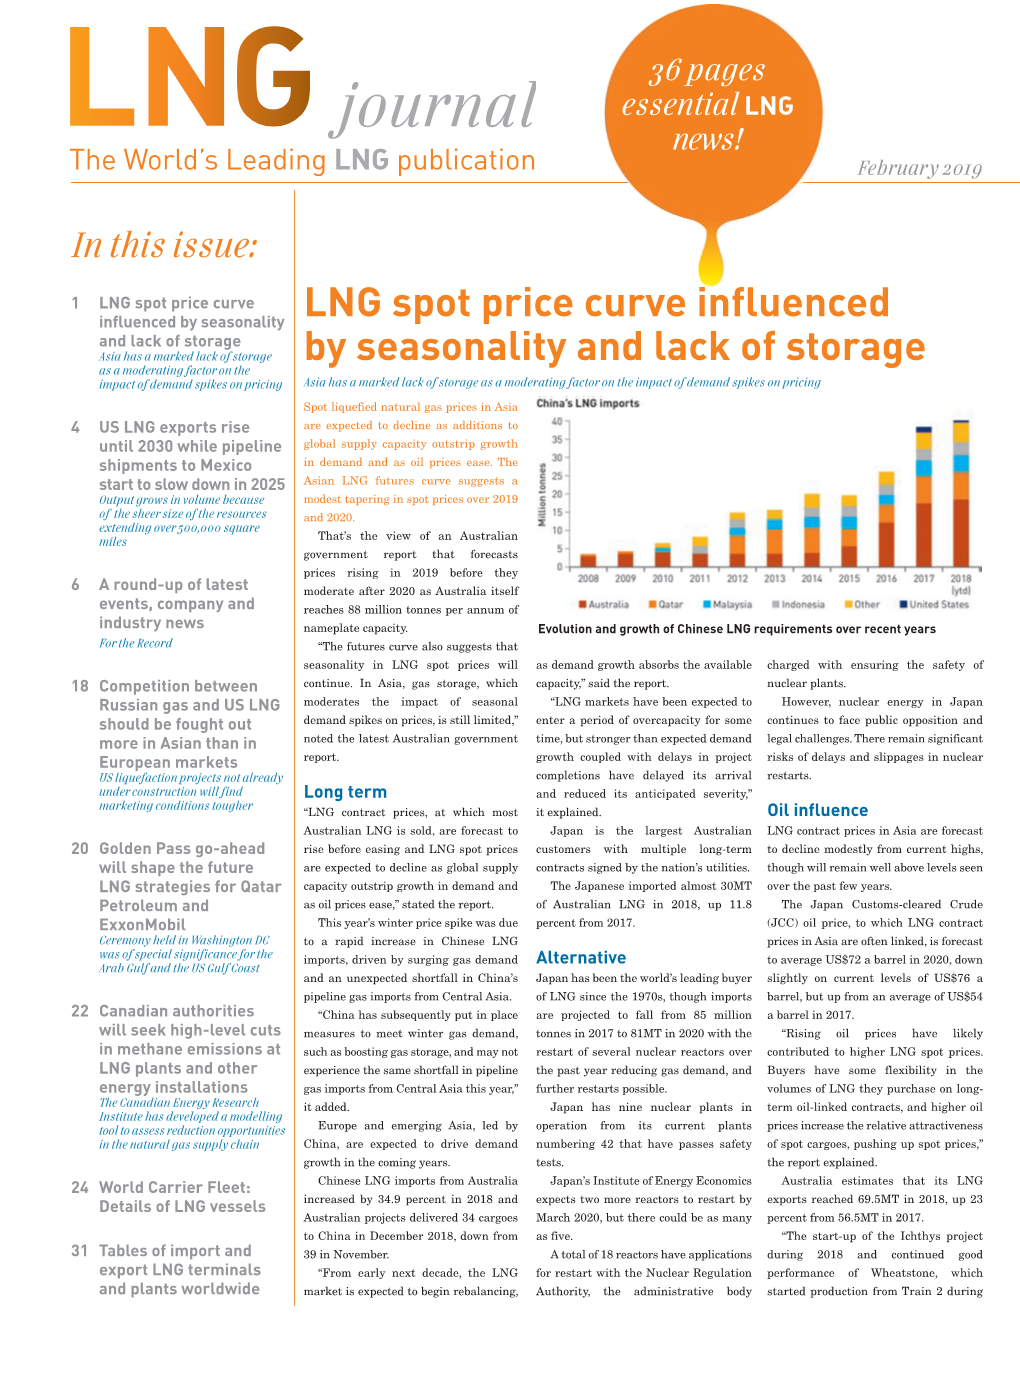 LNG Spot Price Curve Influenced by Seasonality and Lack of Storage